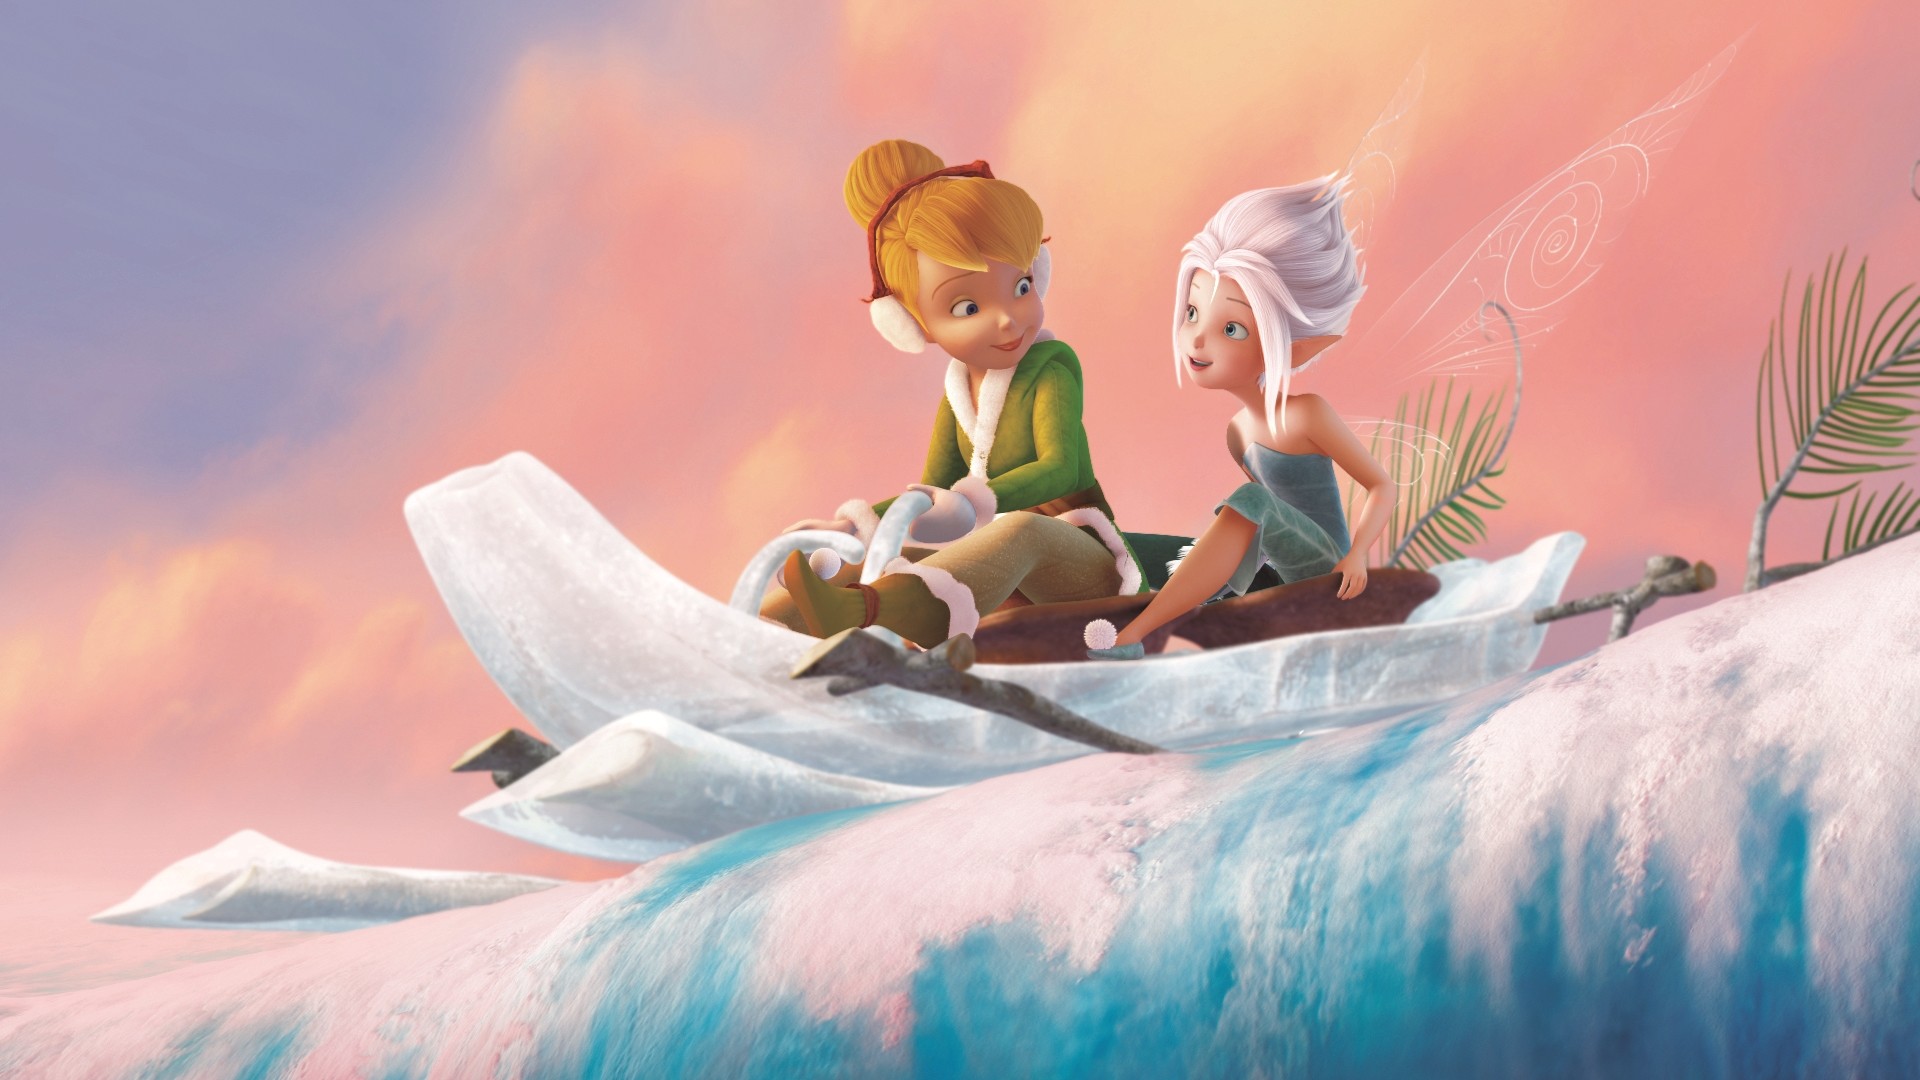 1920x1080 Go sledding - TinkerBell Secret Of The Wings - Watch anime and cartoon  because fun!